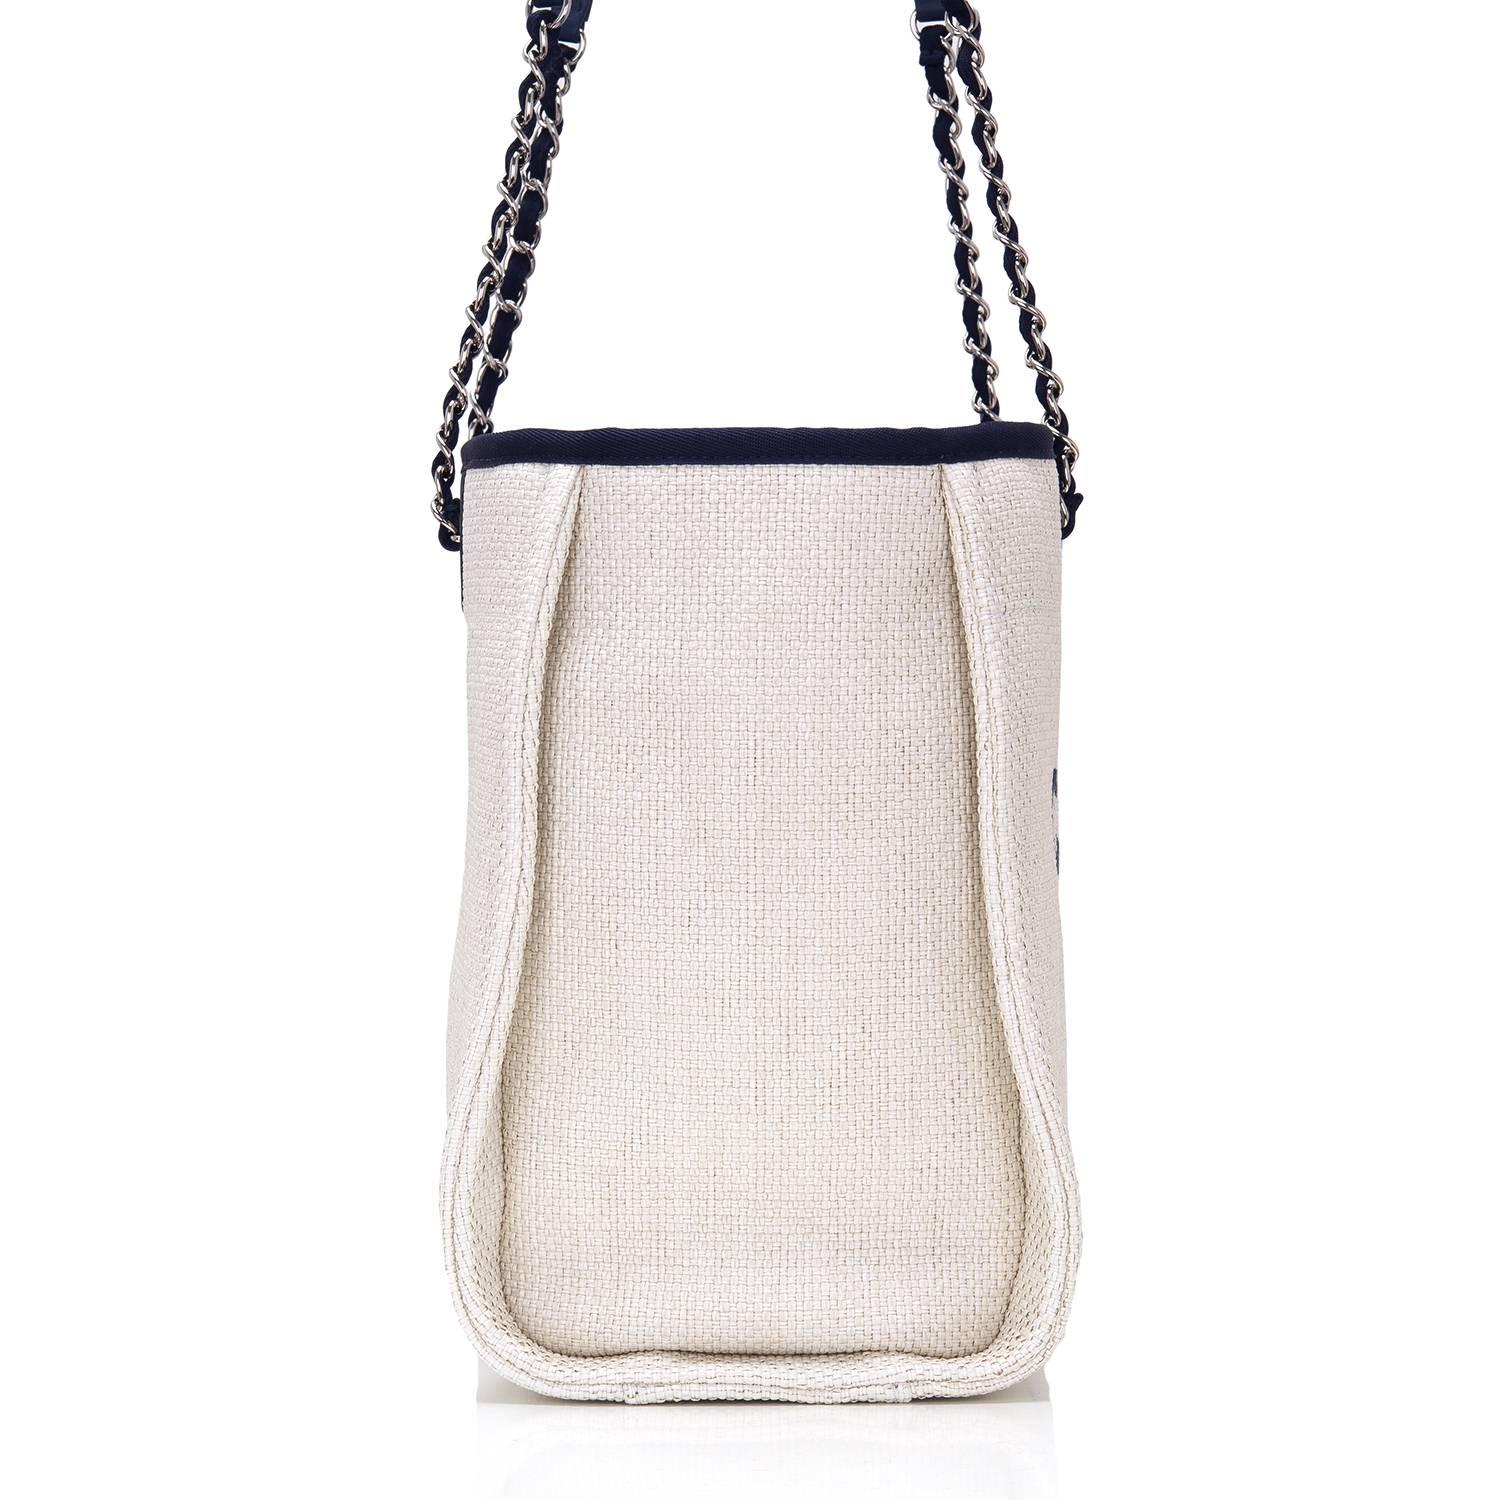 Chanel Small White Deauville Canvas Tote In New Condition For Sale In New York, NY